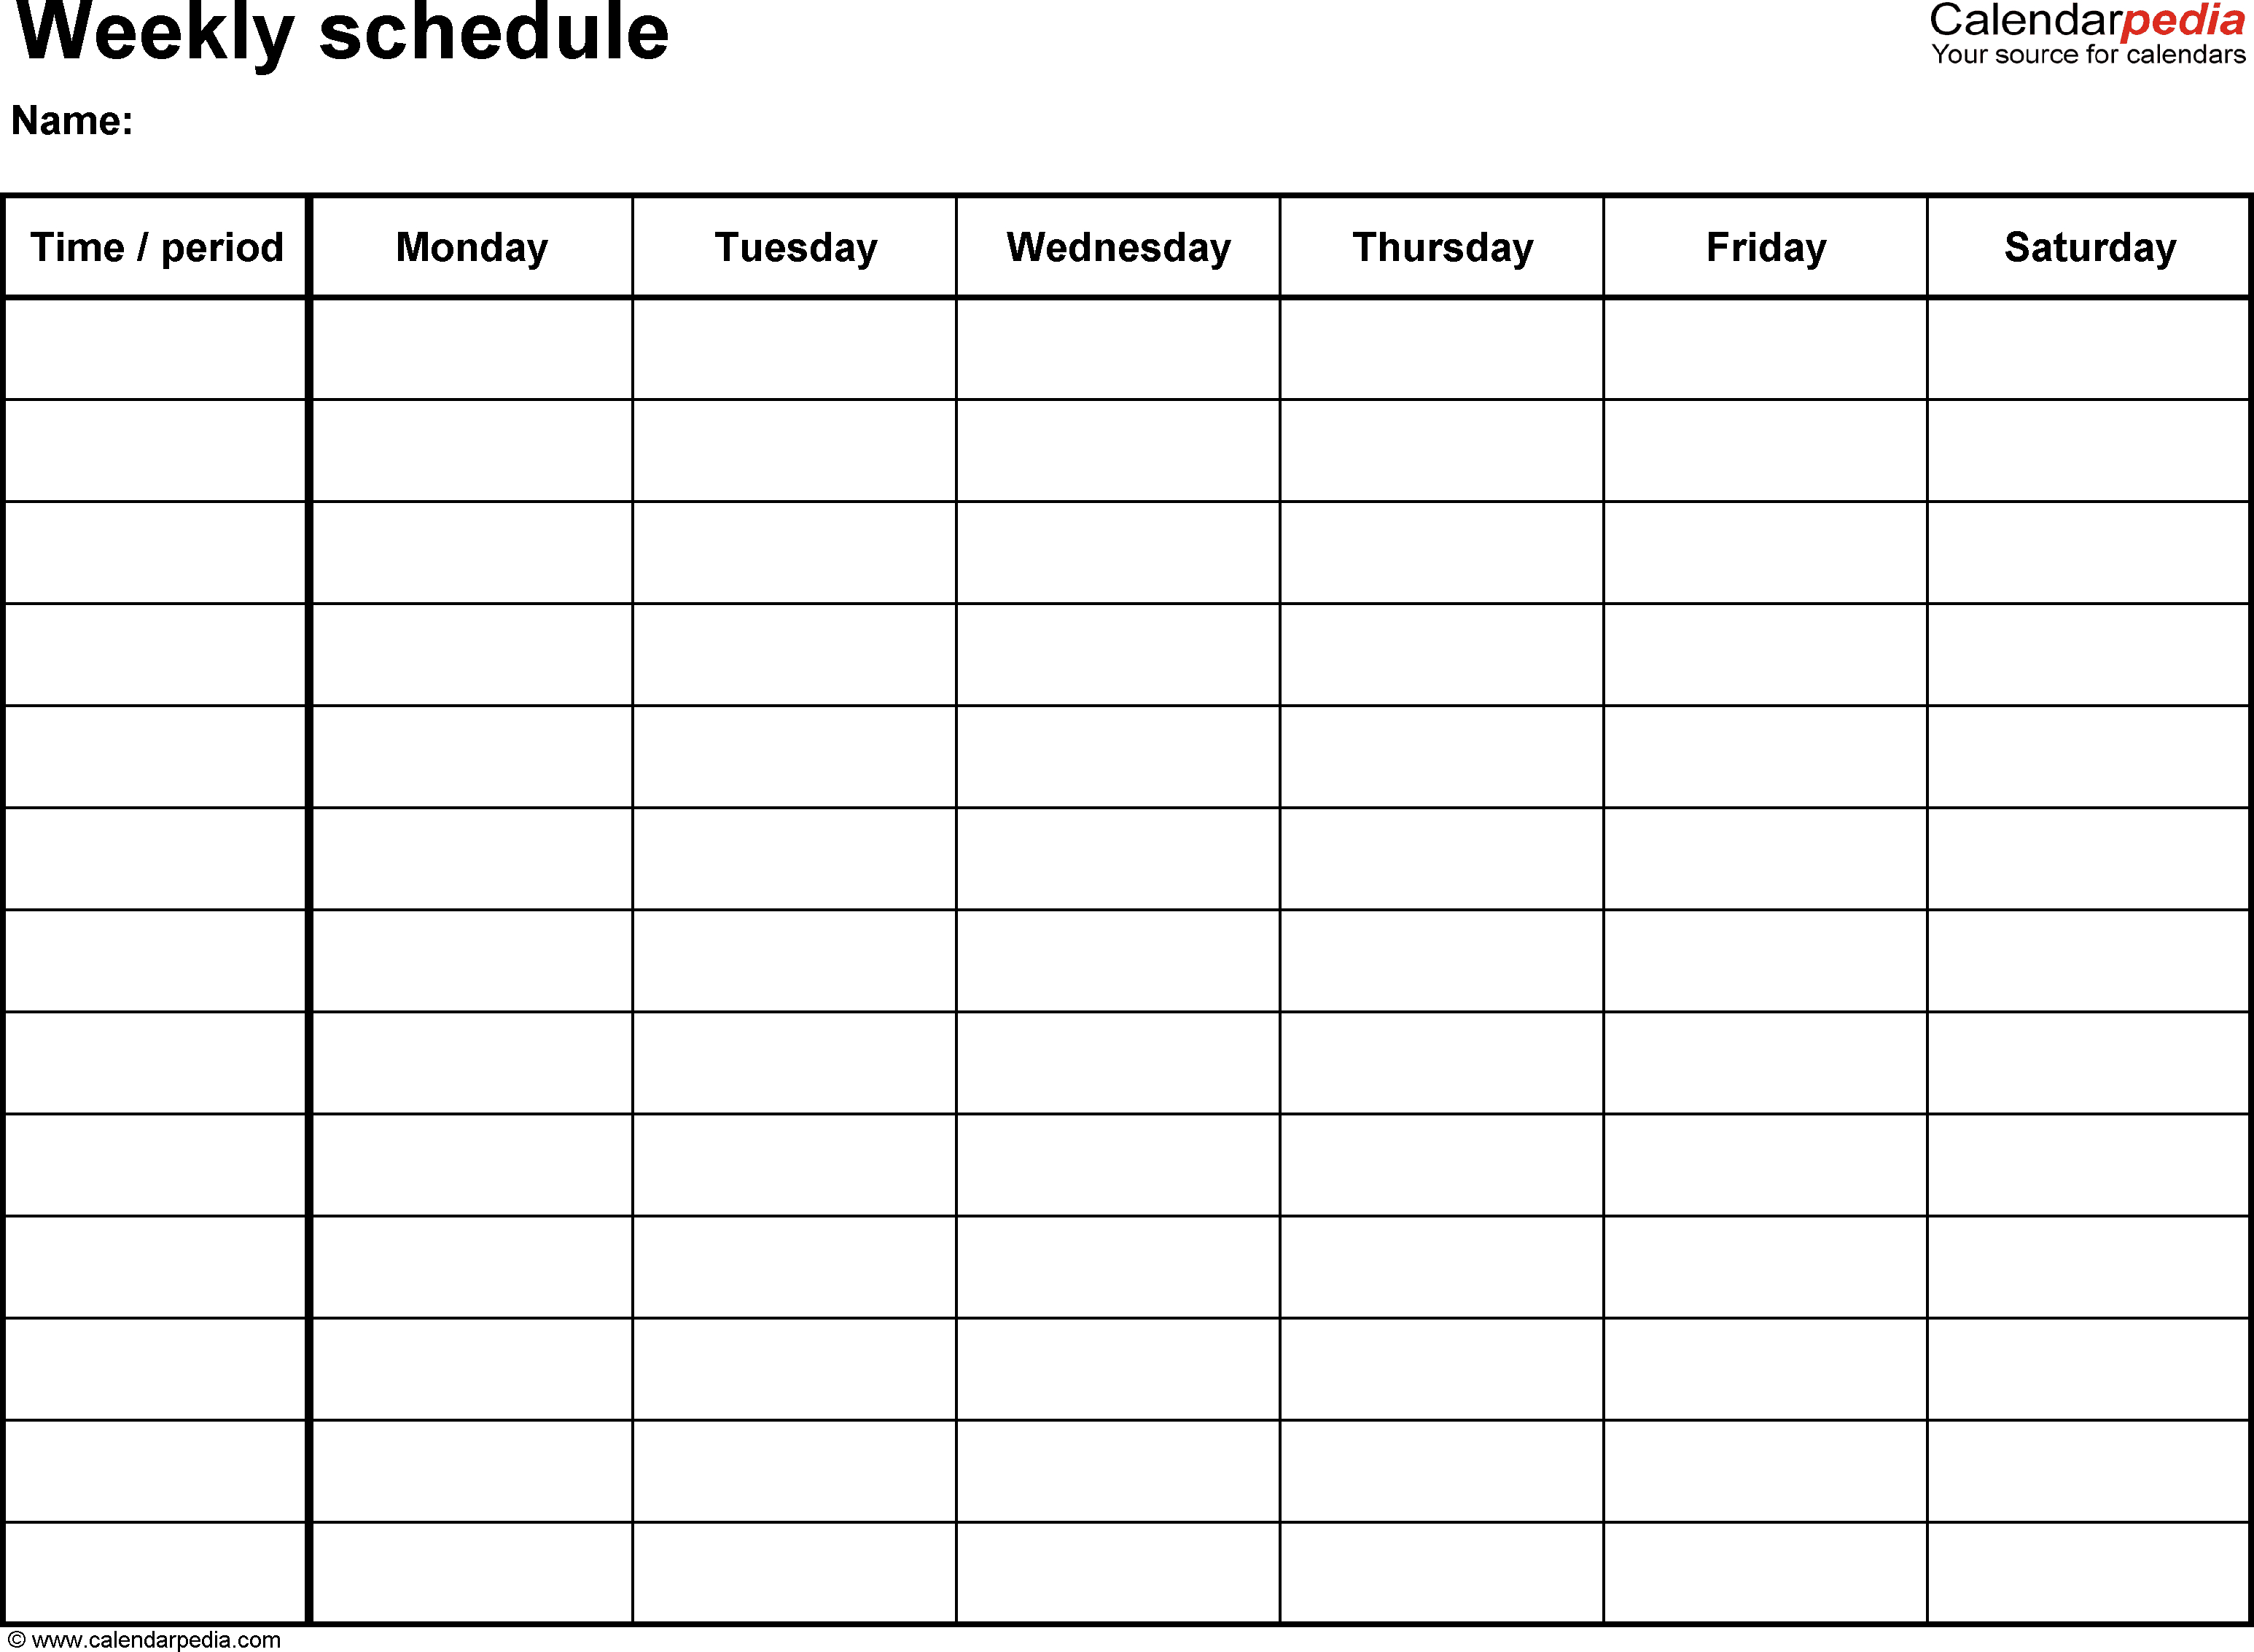 Free Weekly Schedule Templates For Word - 18 Templates - Free Printable Blank Work Schedules